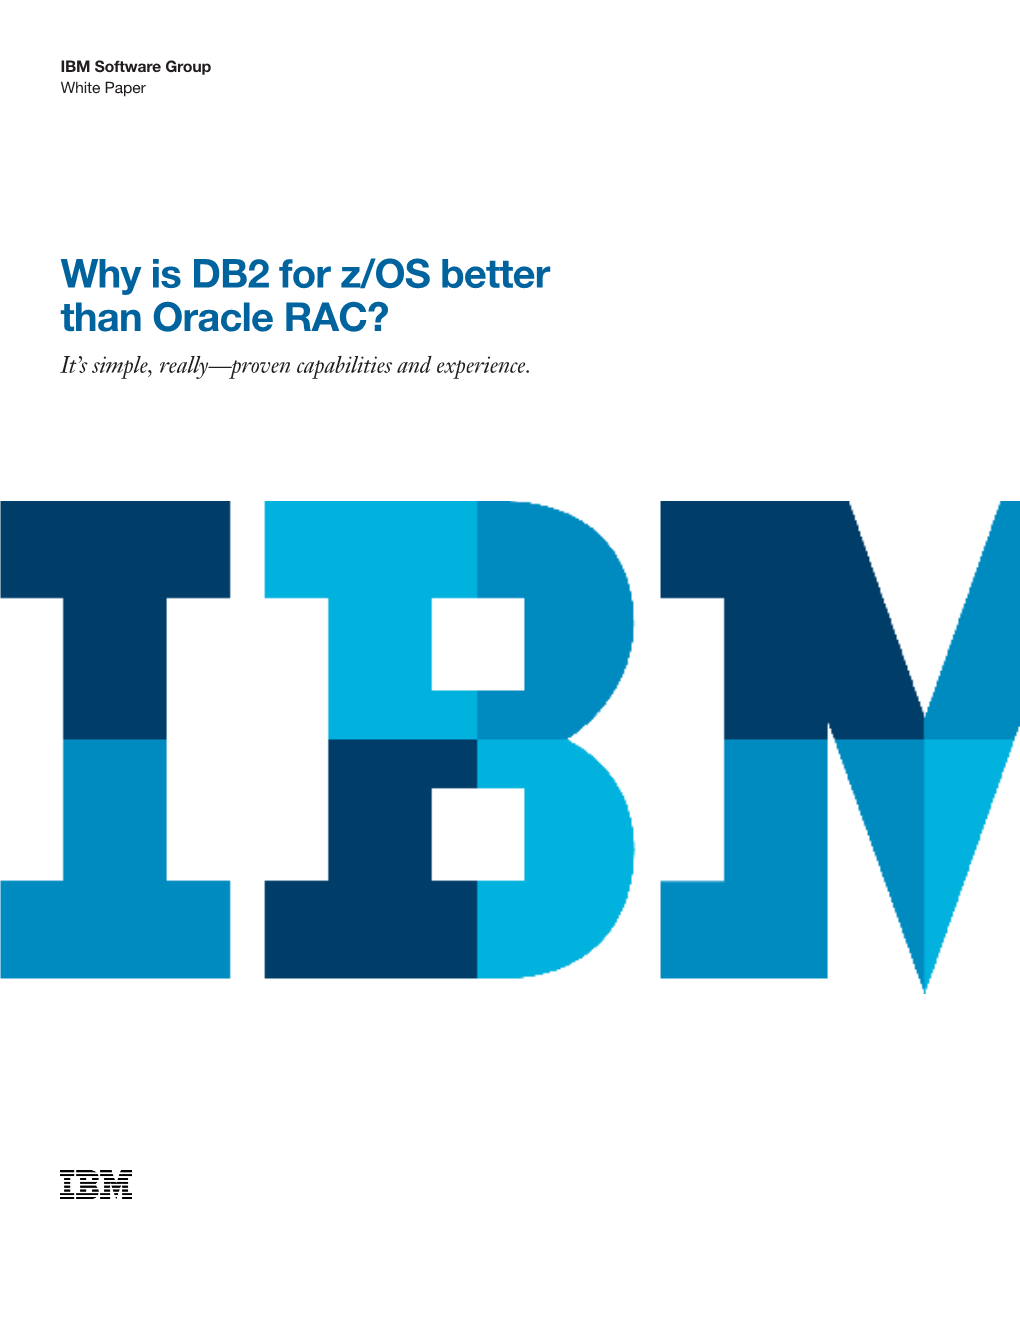 Why Is DB2 for Z/OS Better Than Oracle RAC? It’S Simple, Really—Proven Capabilities and Experience